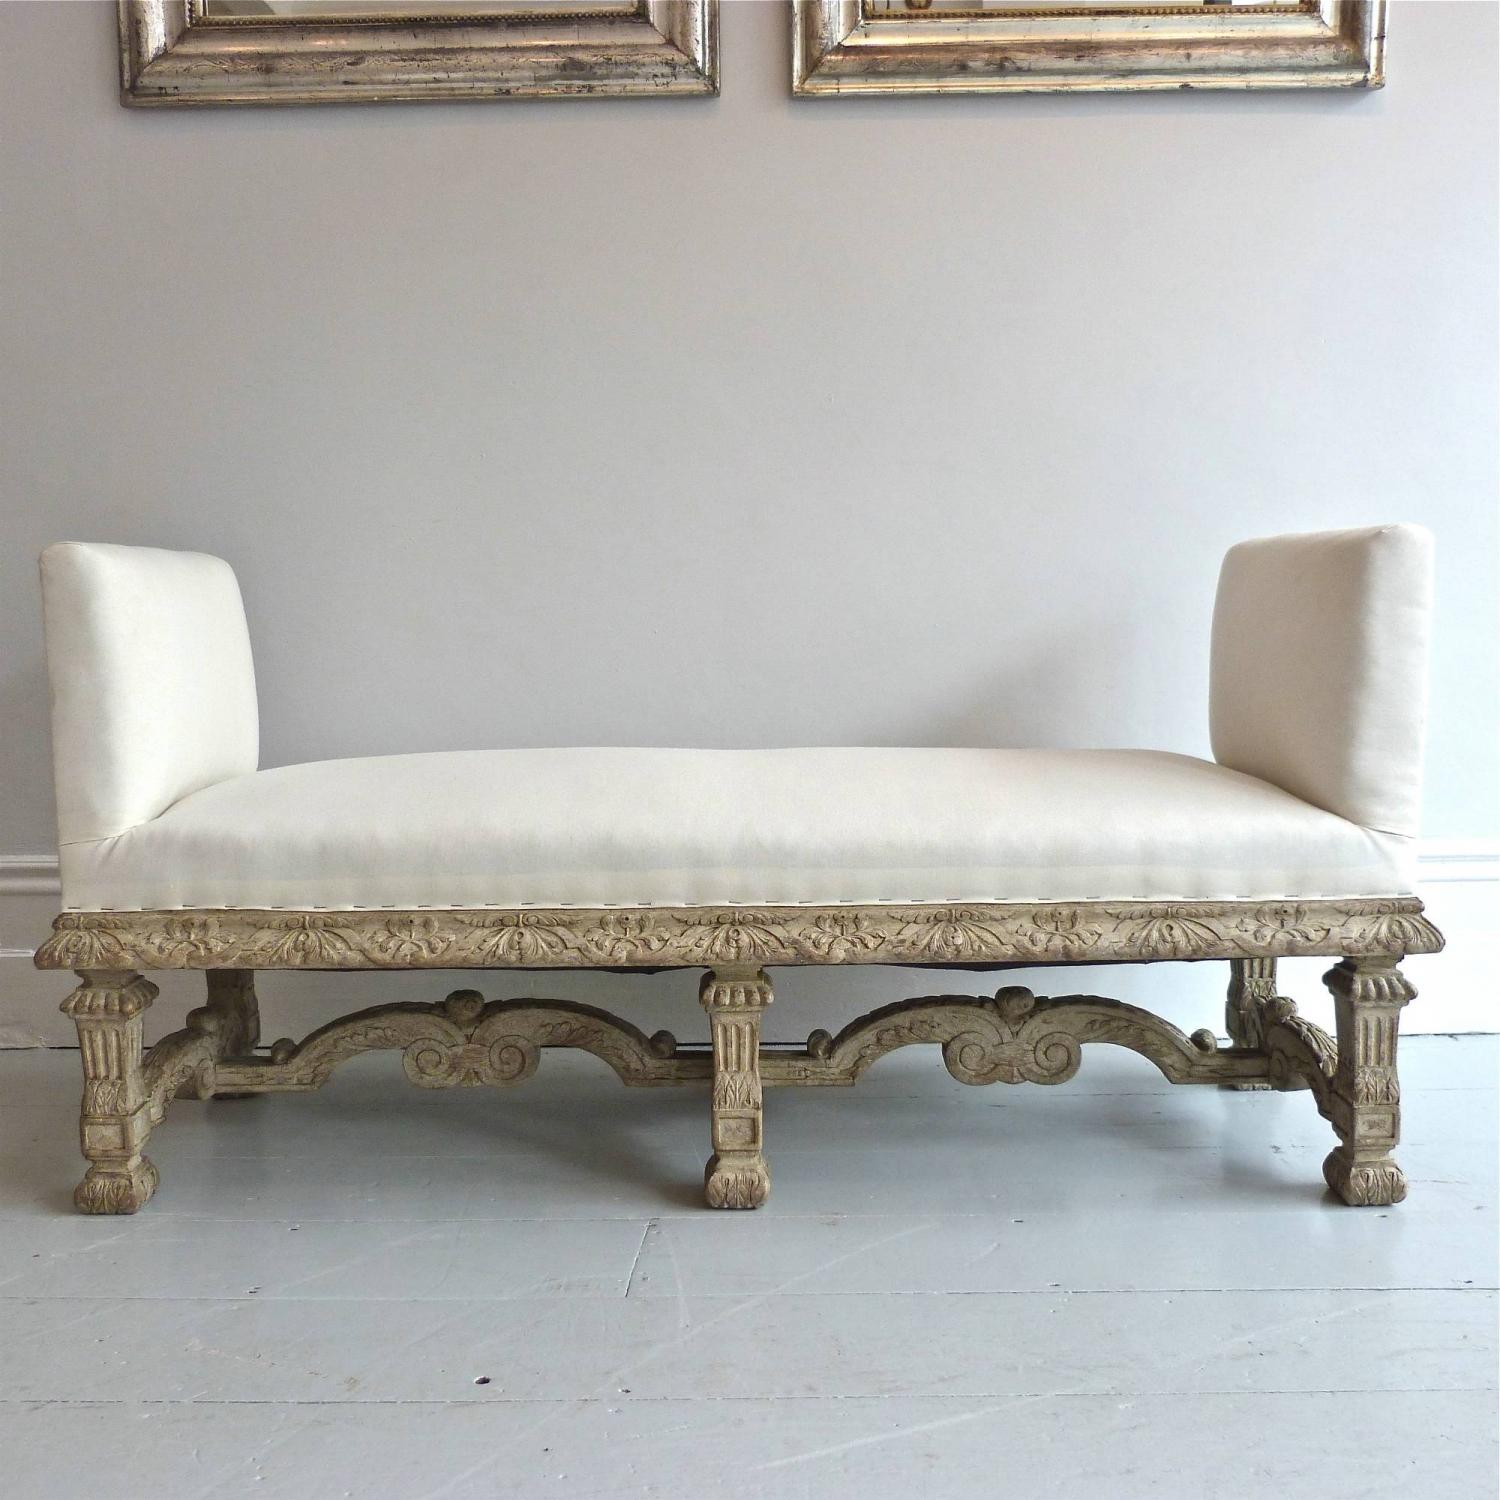 19TH CENTURY ITALIAN BAROQUE STYLE DAYBED 